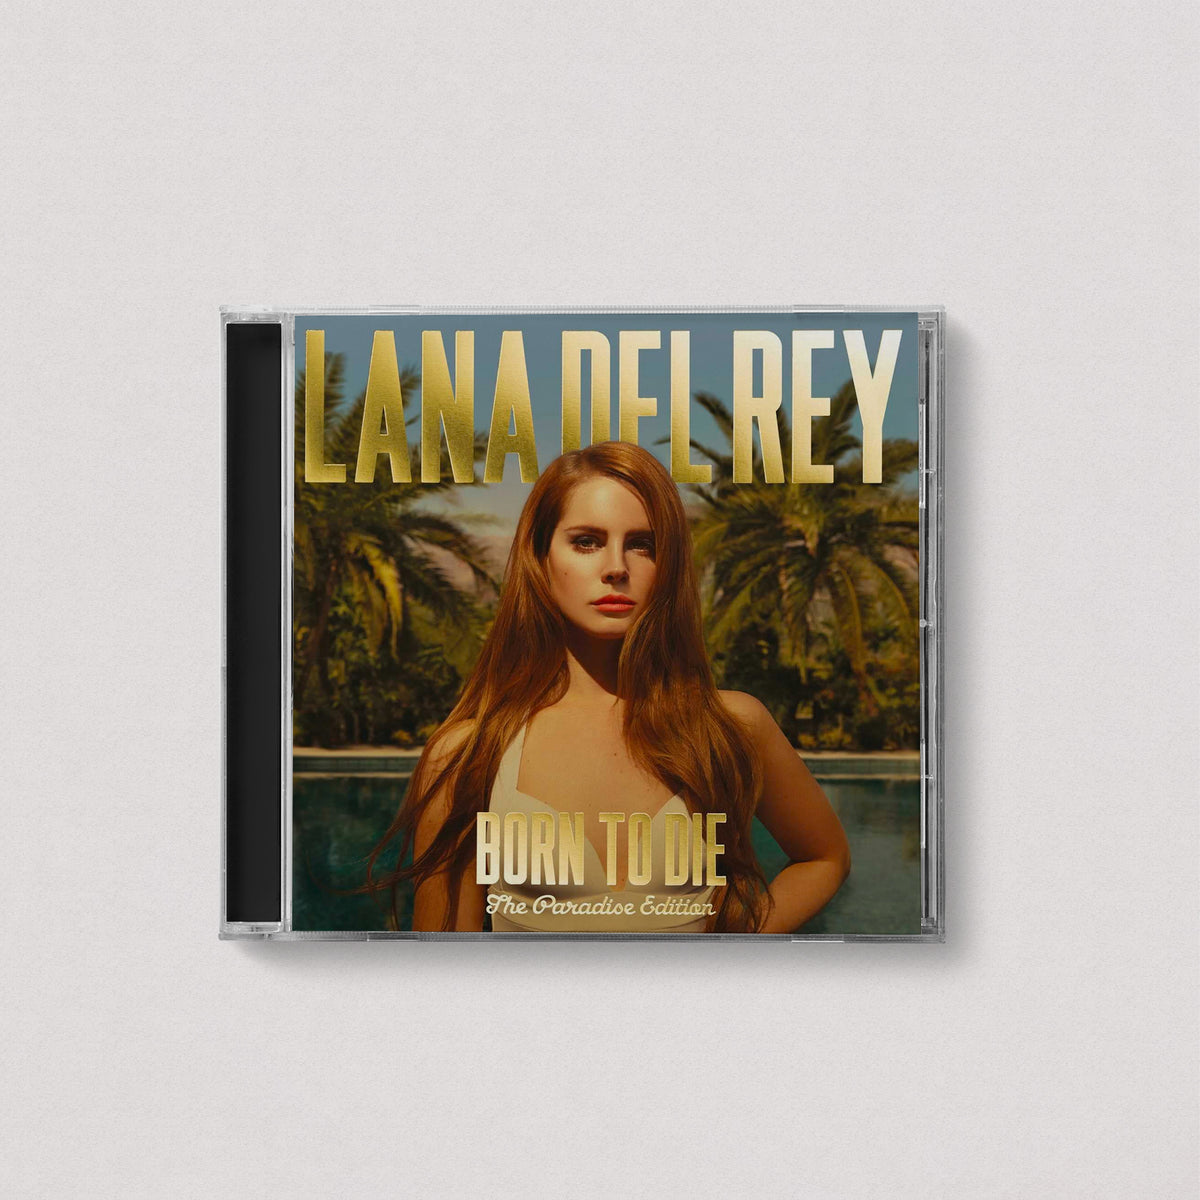 Lana Del Rey - Born To Die "The Paradise Edition" (CD)